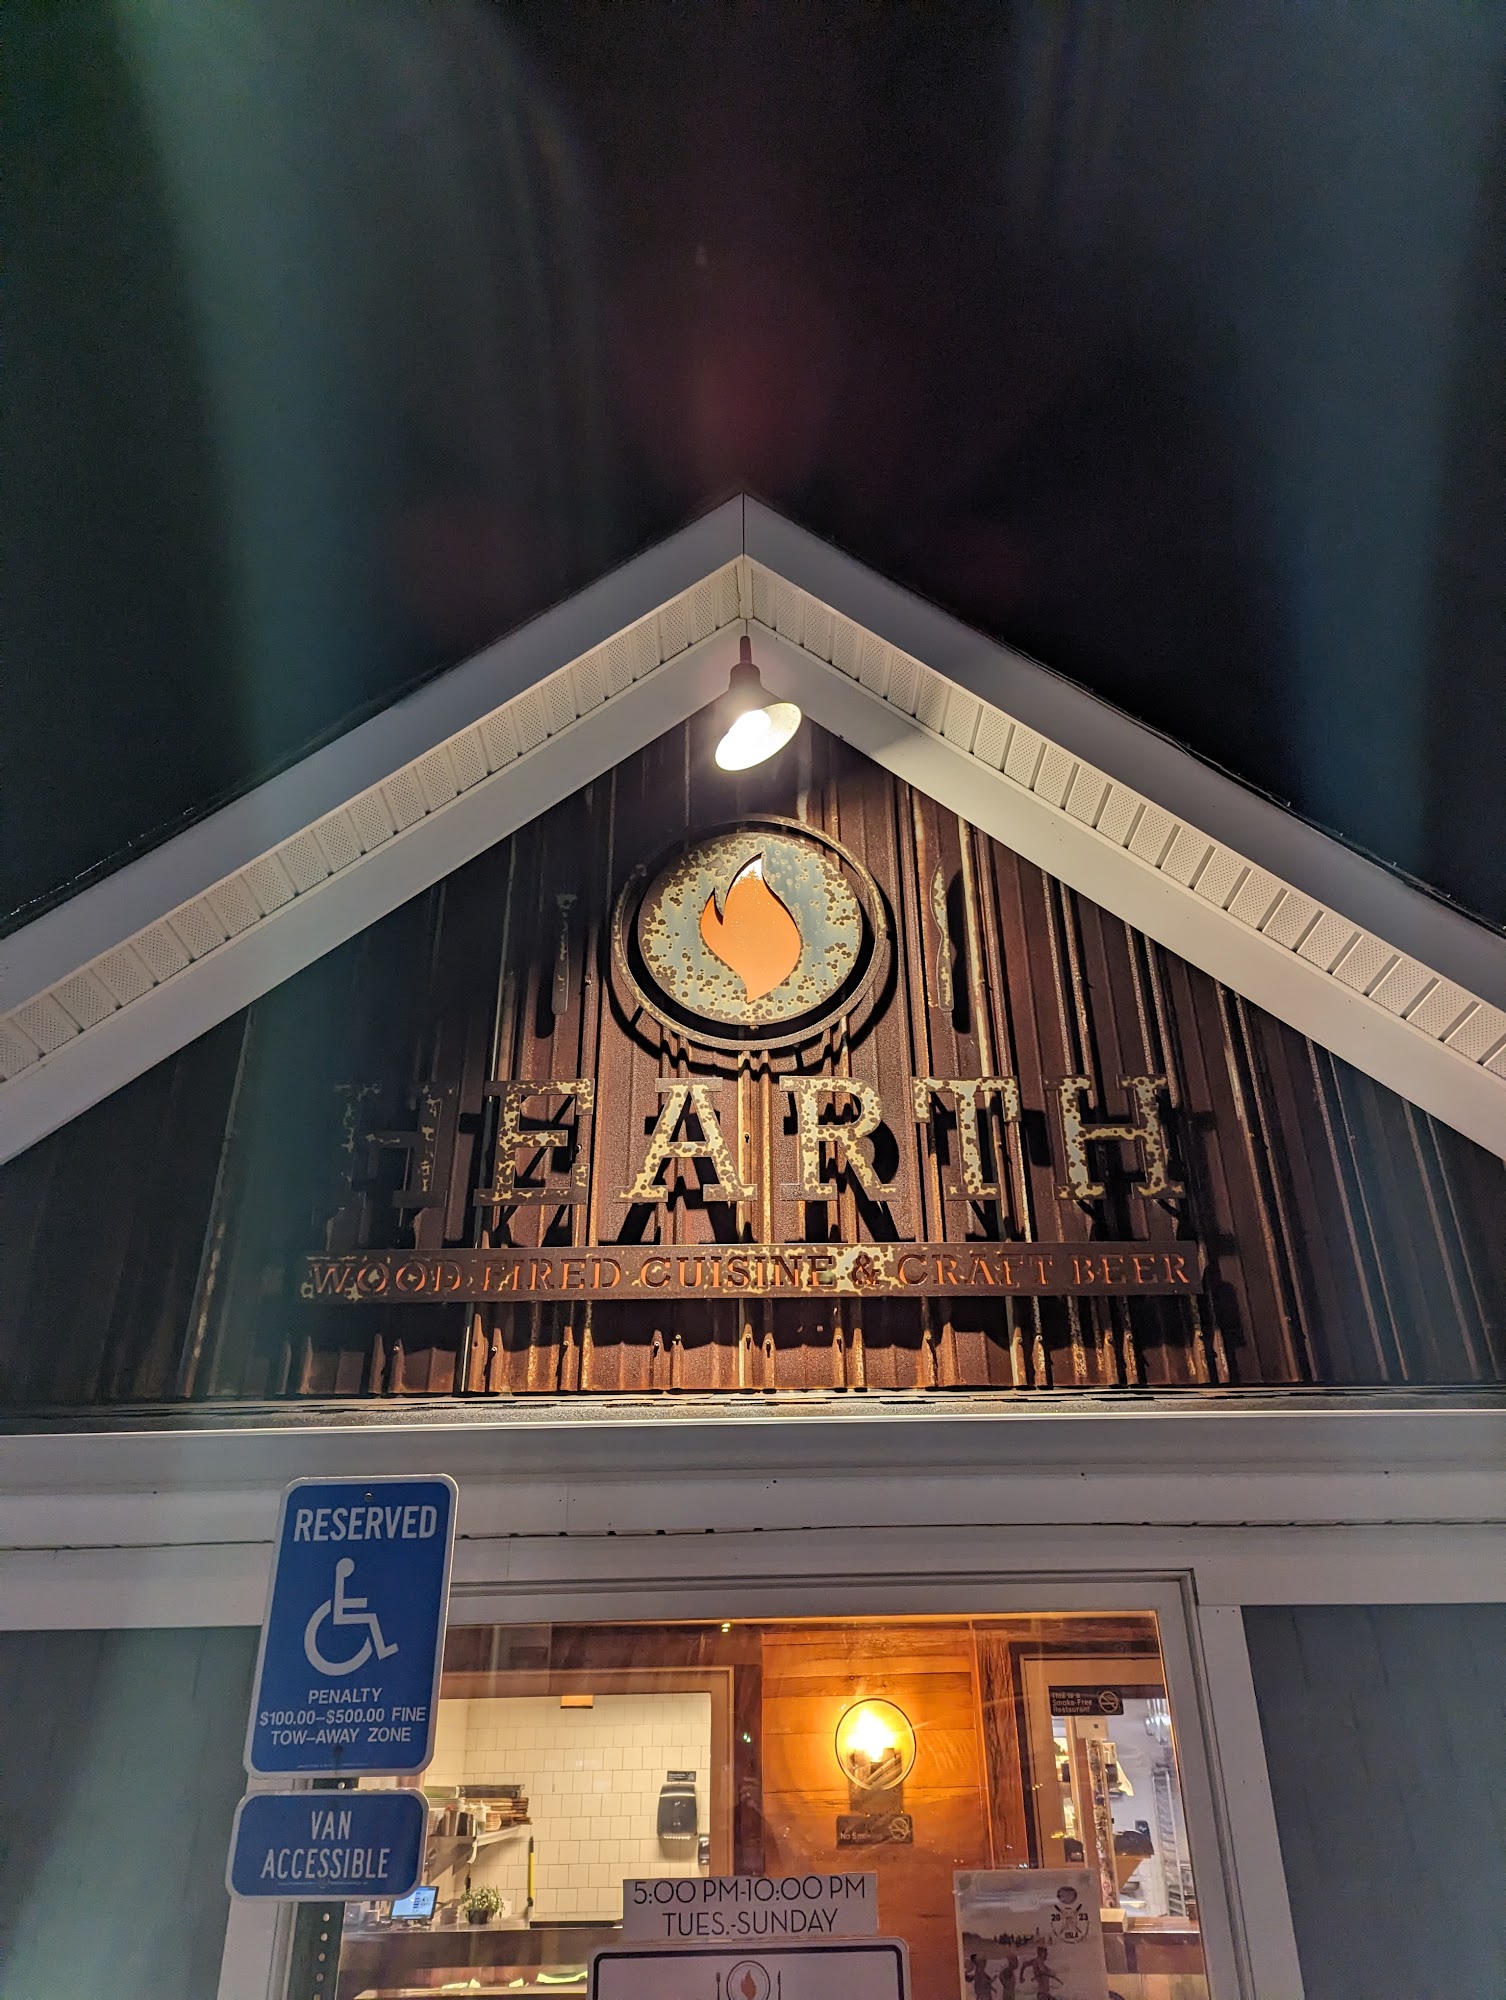 Hearth Wood Fired Cuisine & Craft Beer